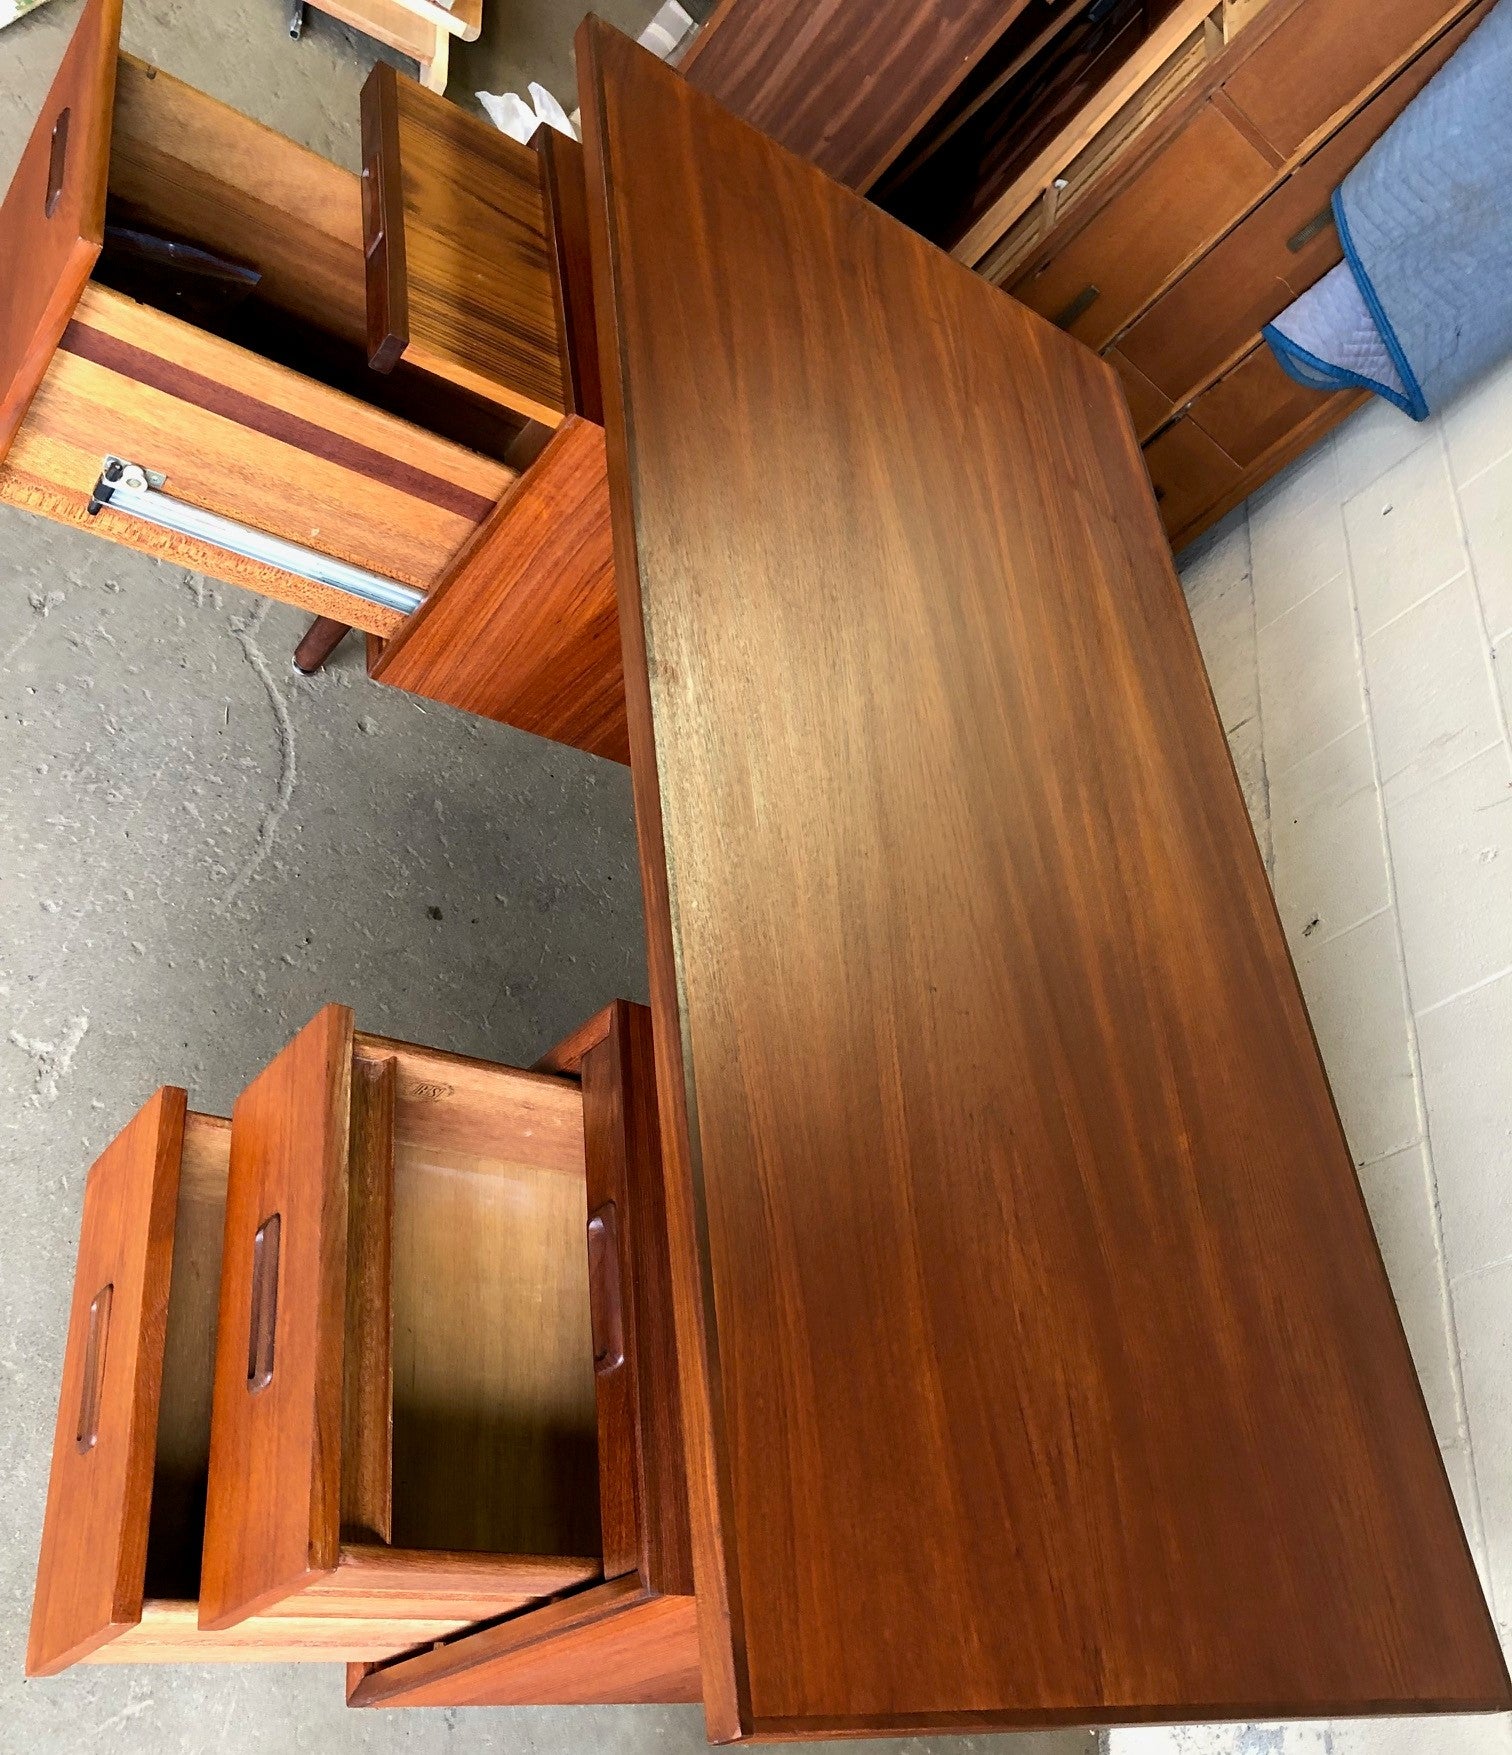 REFINISHED MCM Executive Teak Desk with Floating Top, Free Standing by RS Associates - Mid Century Modern Toronto